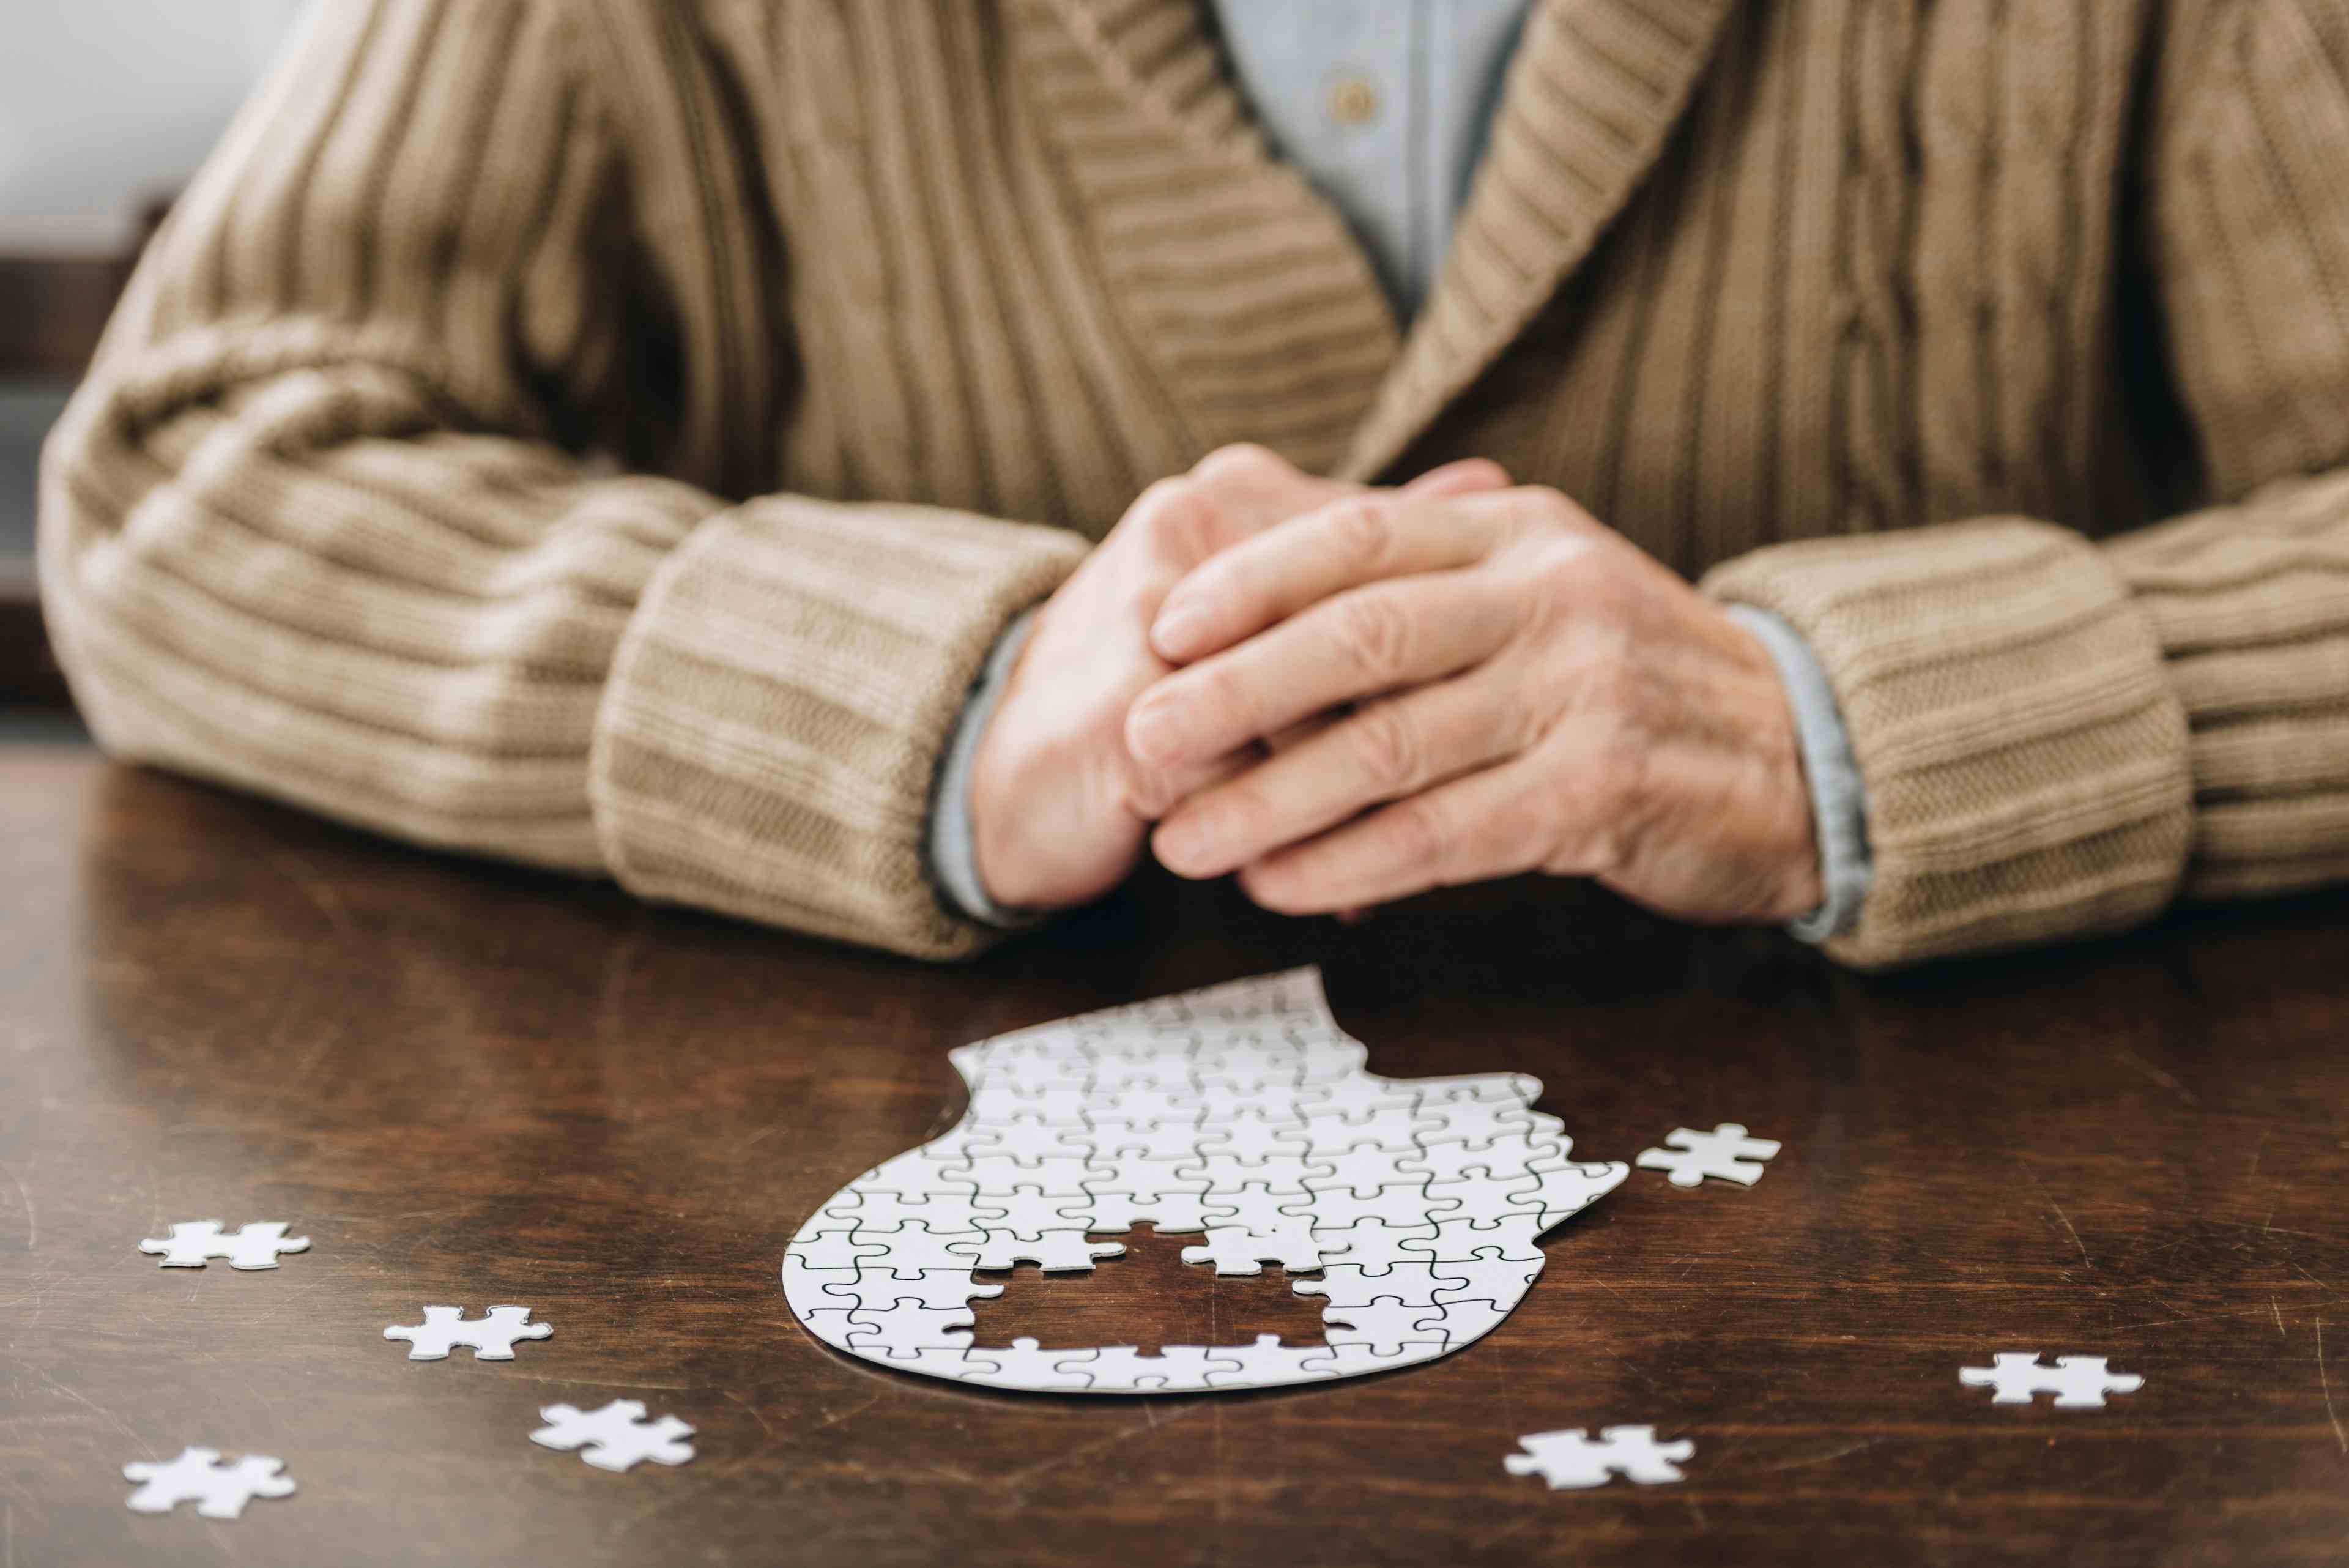 Cropped view of senior man playing with puzzles on table- Image credit: LIGHTFIELD STUDIOS | stock.adobe.com